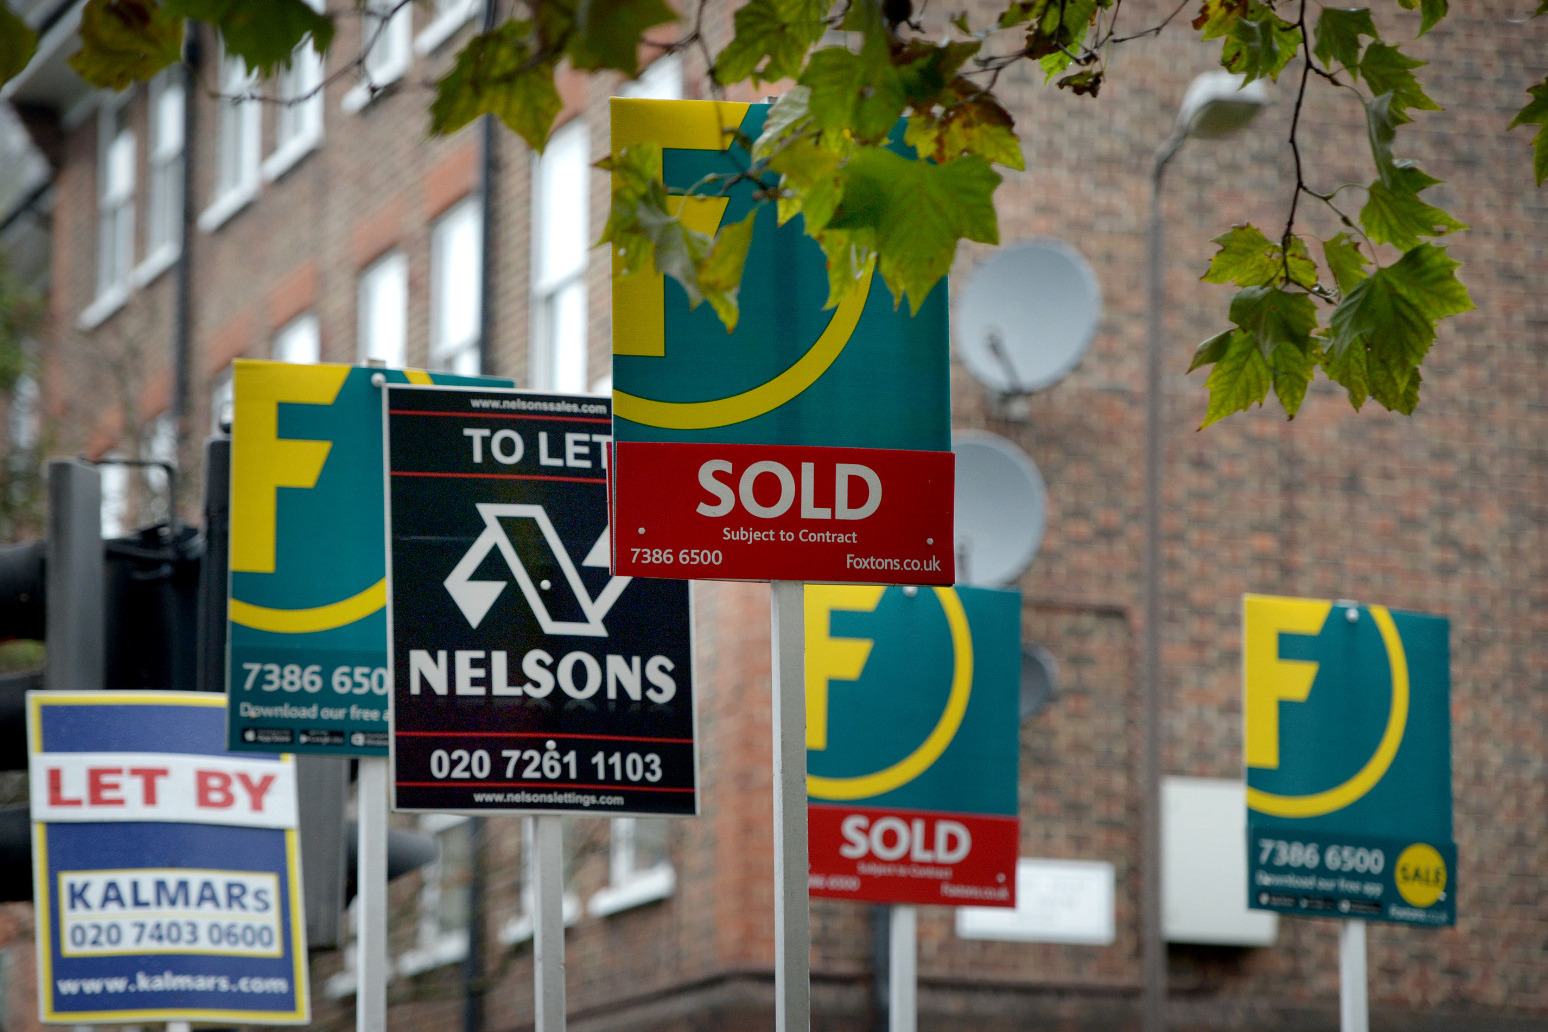 Downward trend in house prices gained traction towards end of 2022 